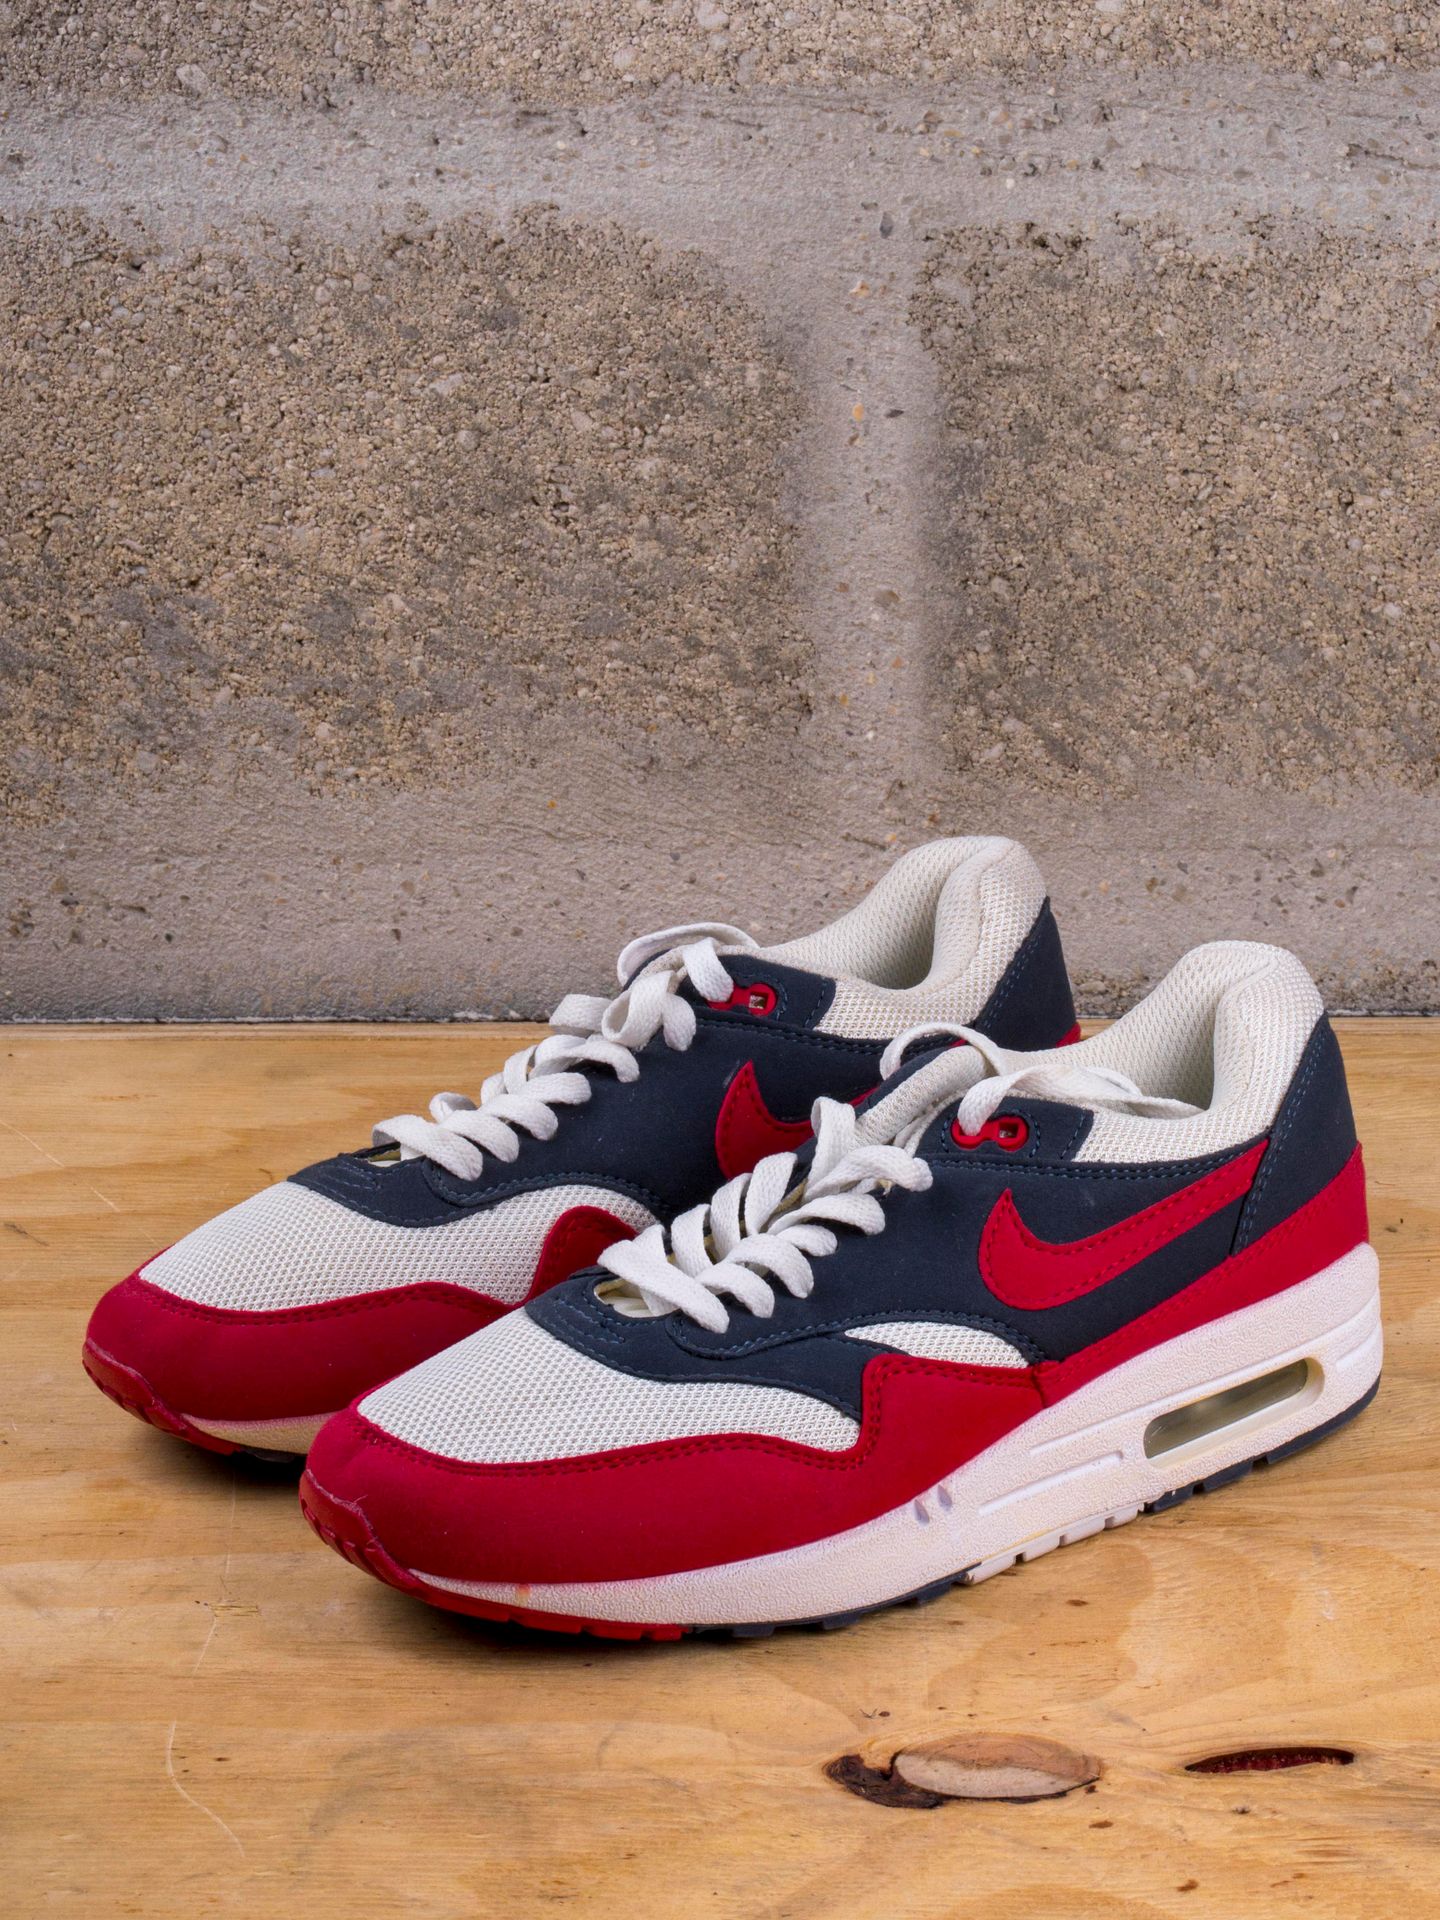 Null NIKE AIR MAX 1

Ripstop Pack

(308866-406)

US 8 / EU 41

(Good condition)